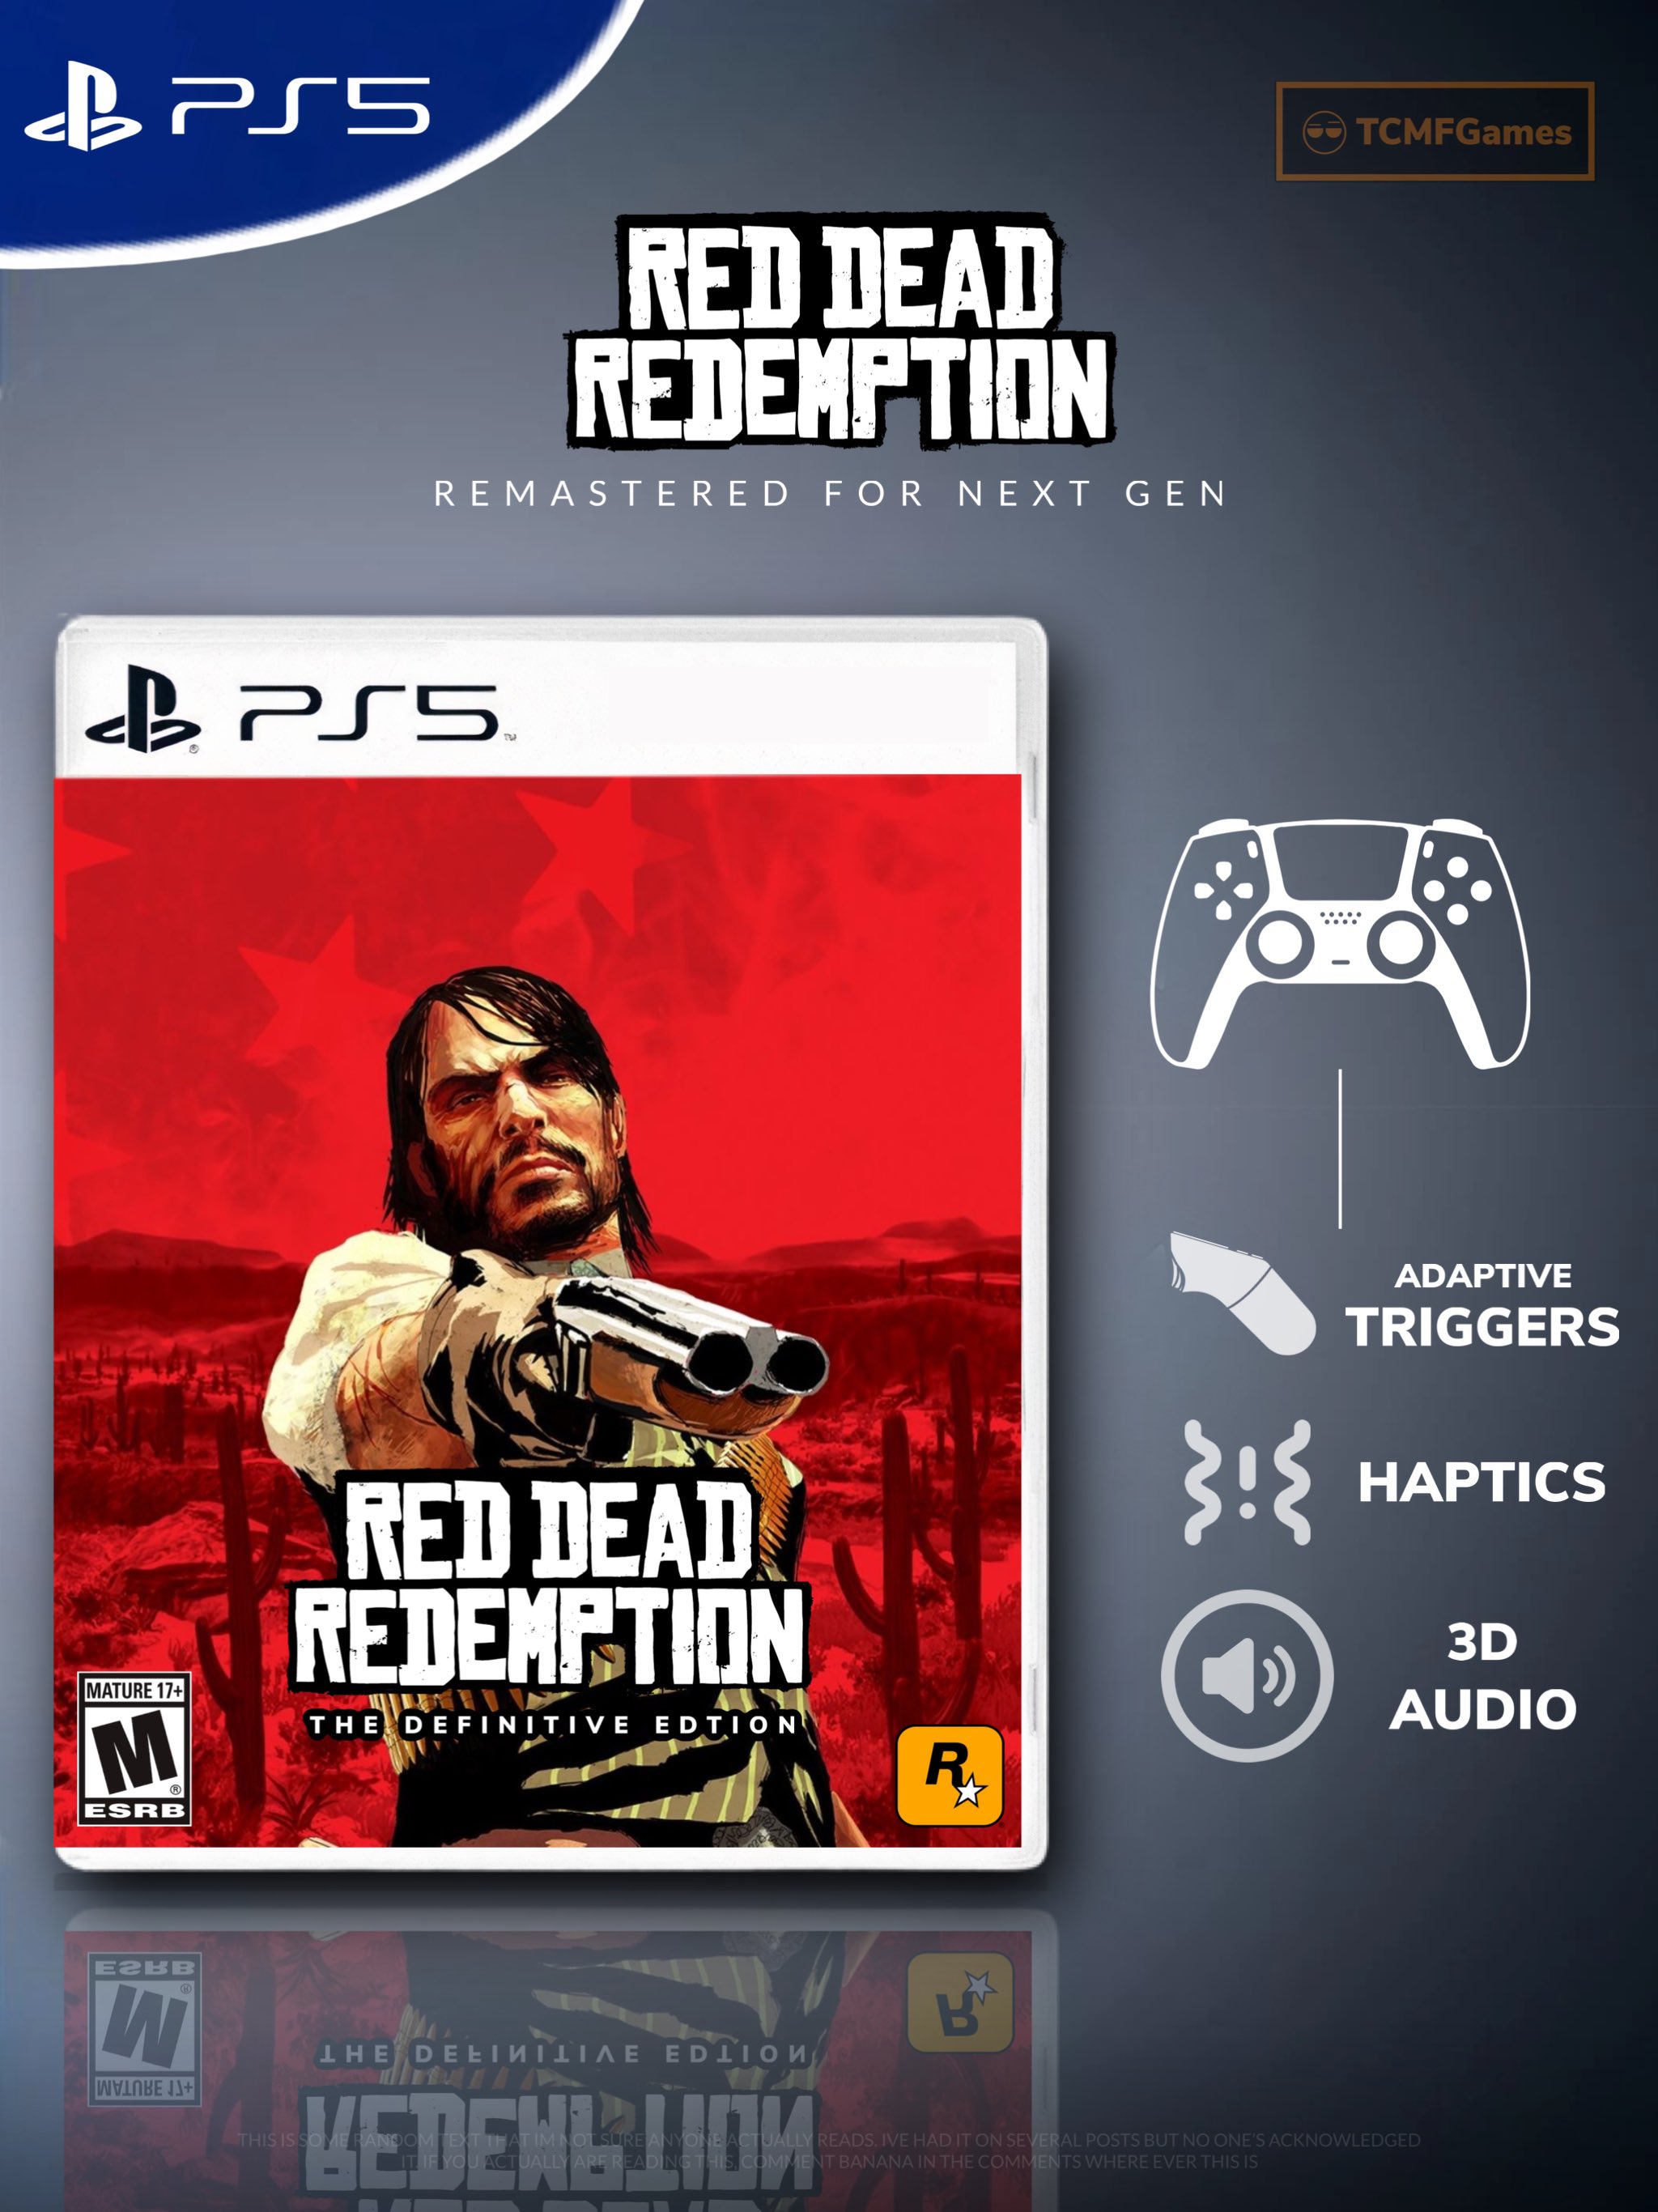 Red Dead Redemption 2 (PS5) cheap - Price of $18.53